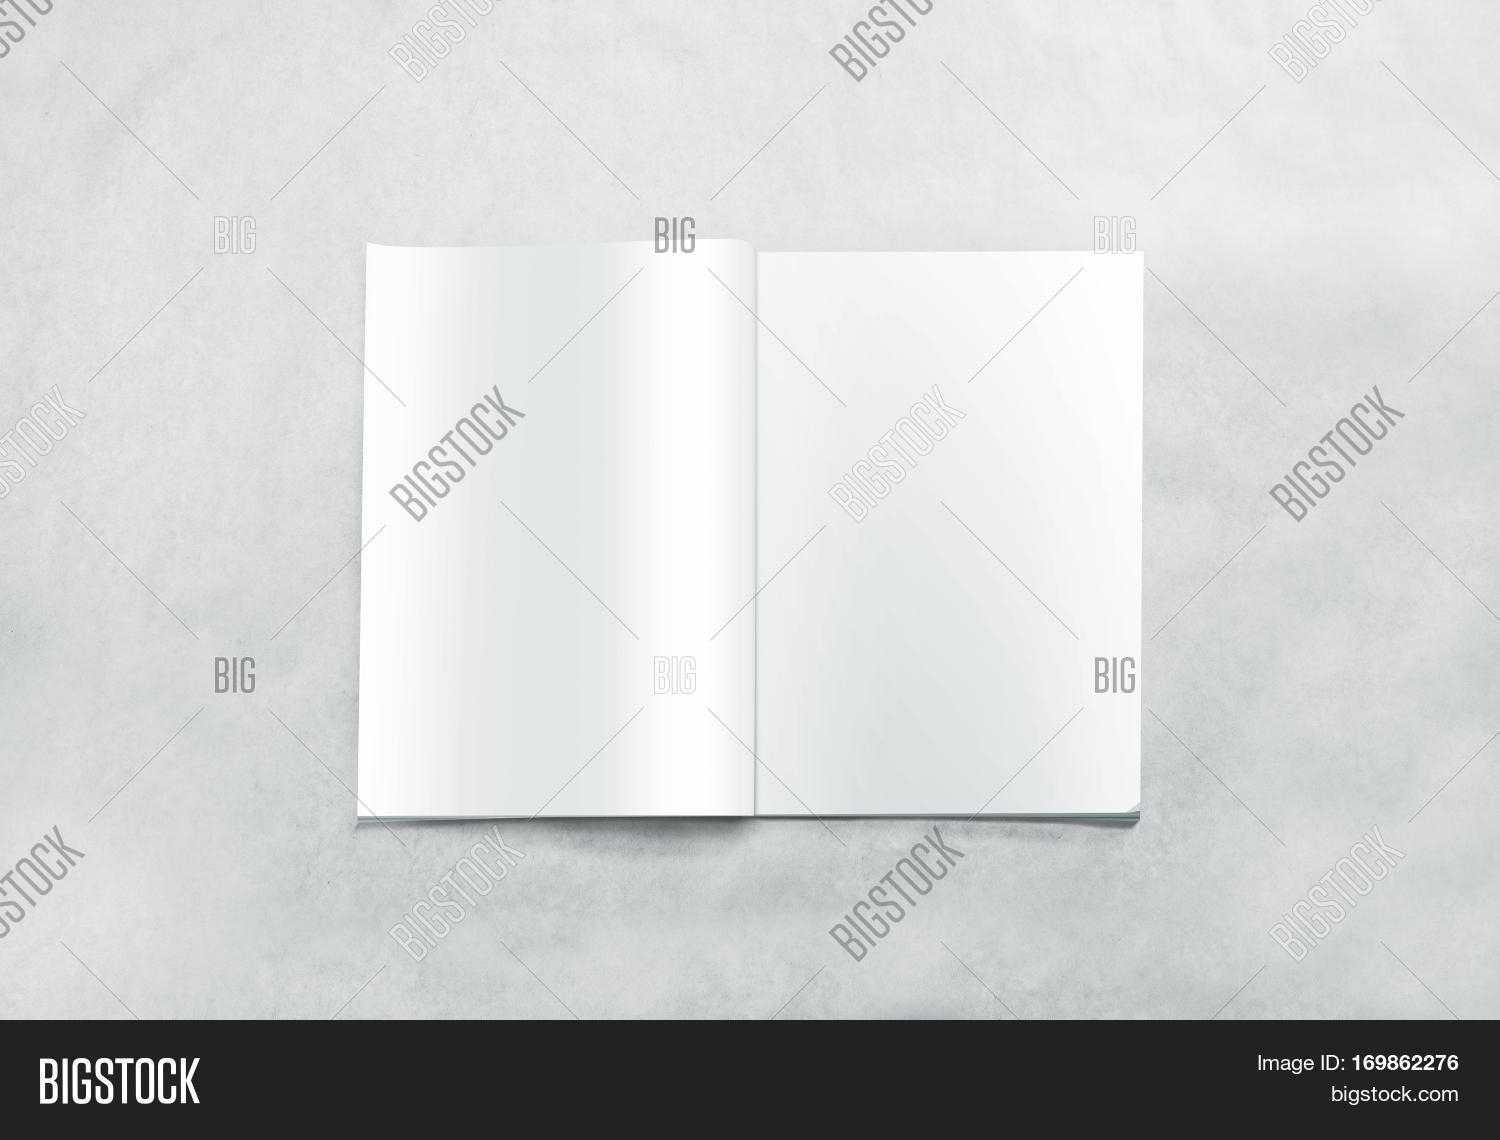 Opened Blank Magazine Image & Photo (Free Trial) | Bigstock Throughout Blank Magazine Spread Template